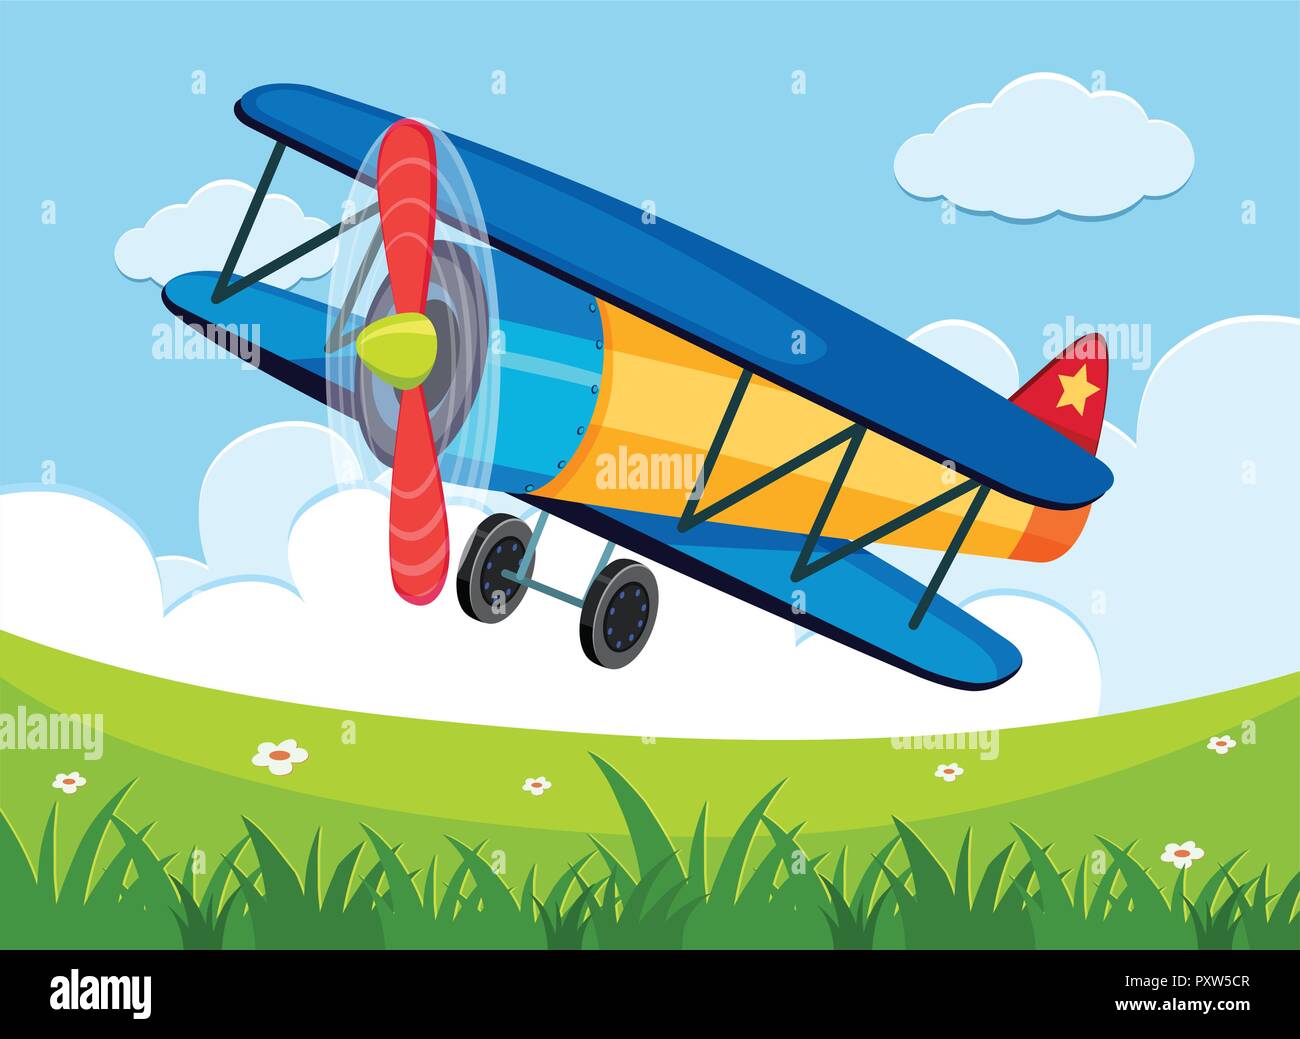 Airplane flying over the green field illustration Stock Vector